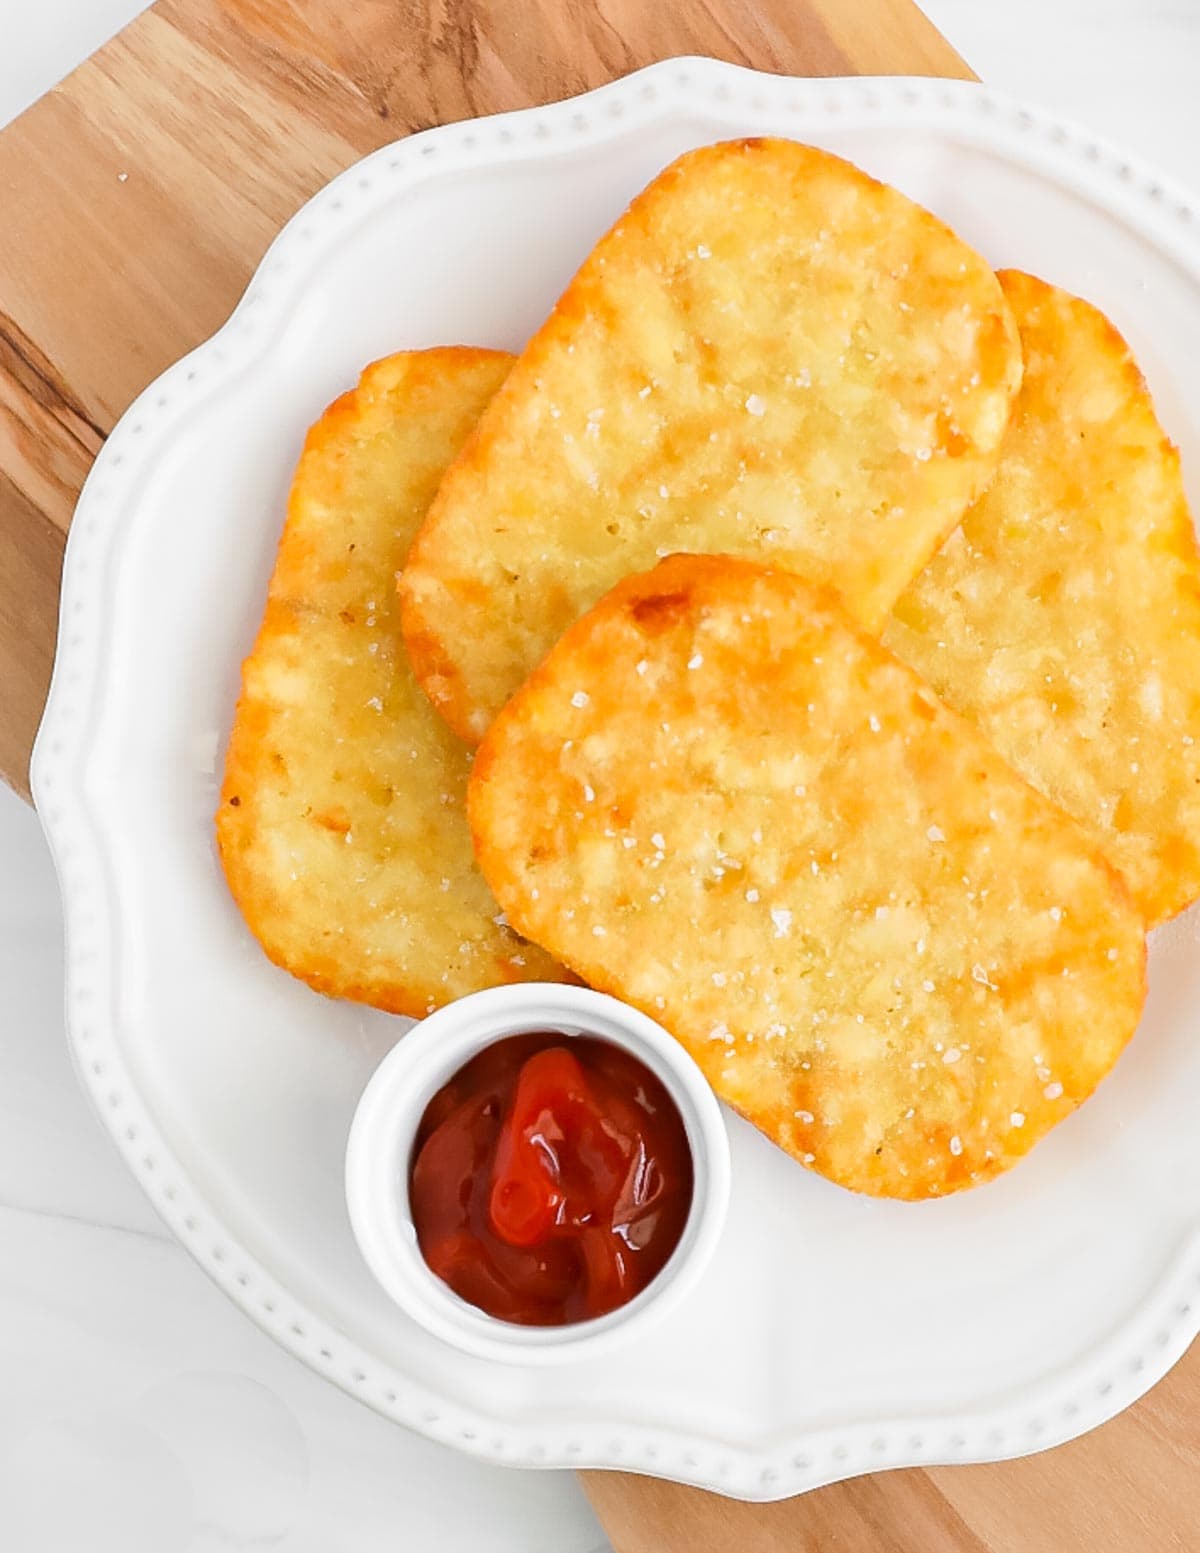 Four toasted hash browns on a white plate with a small bowl of ketchup.